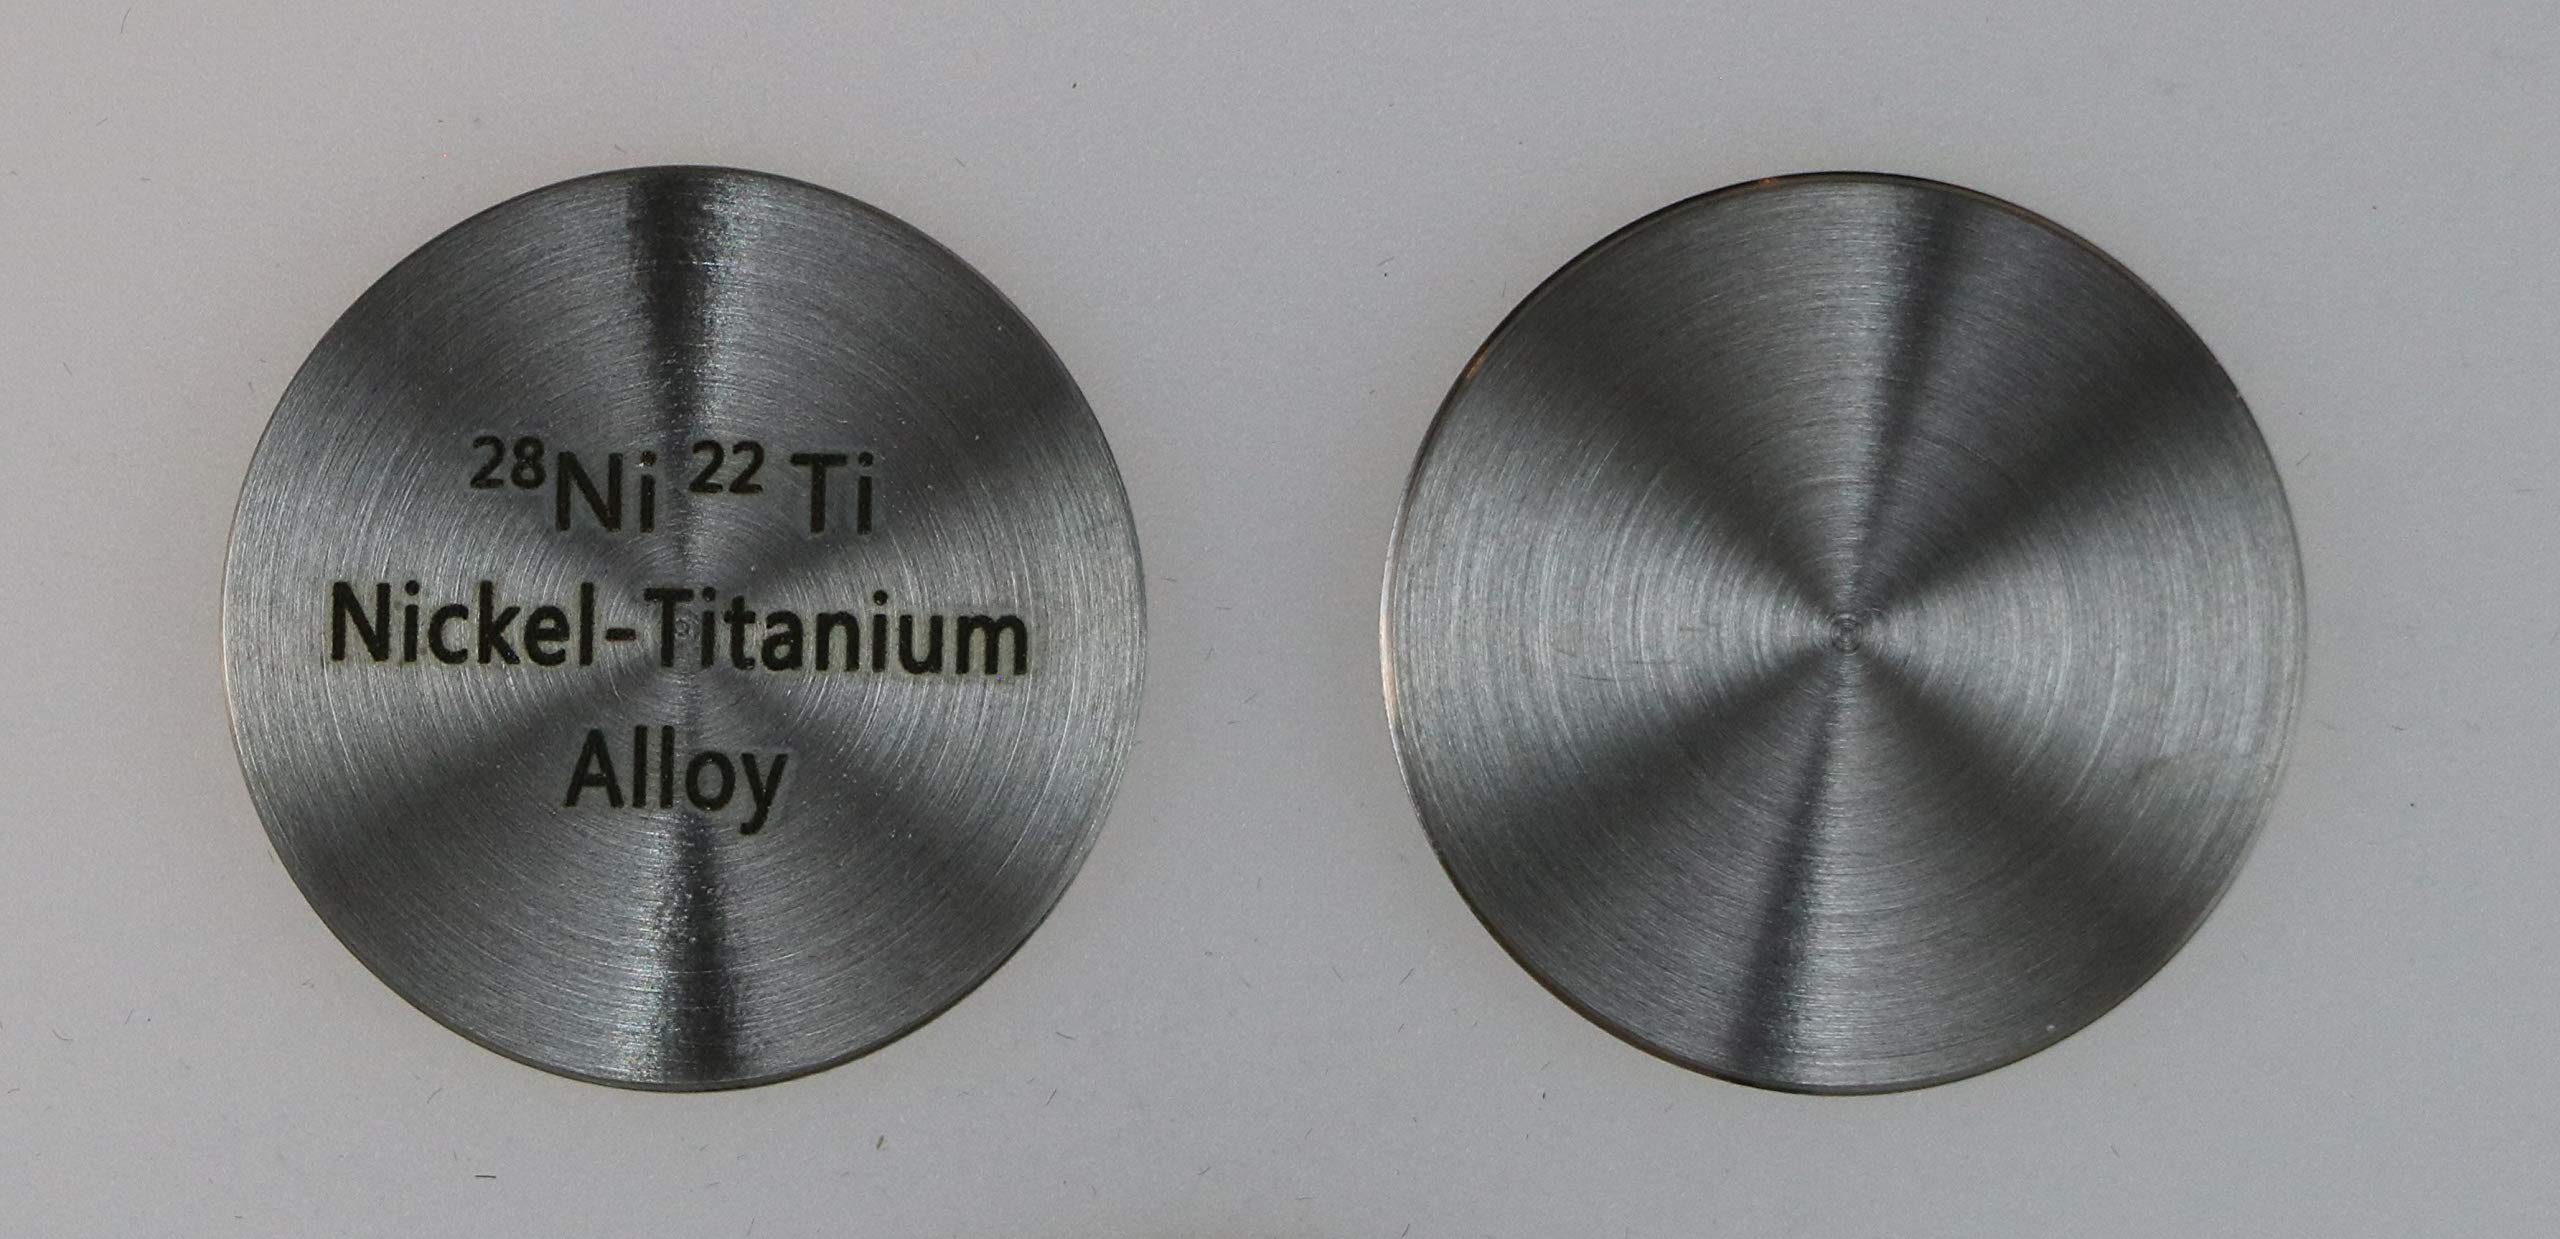 Where nickel-titanium alloys are commonly used?